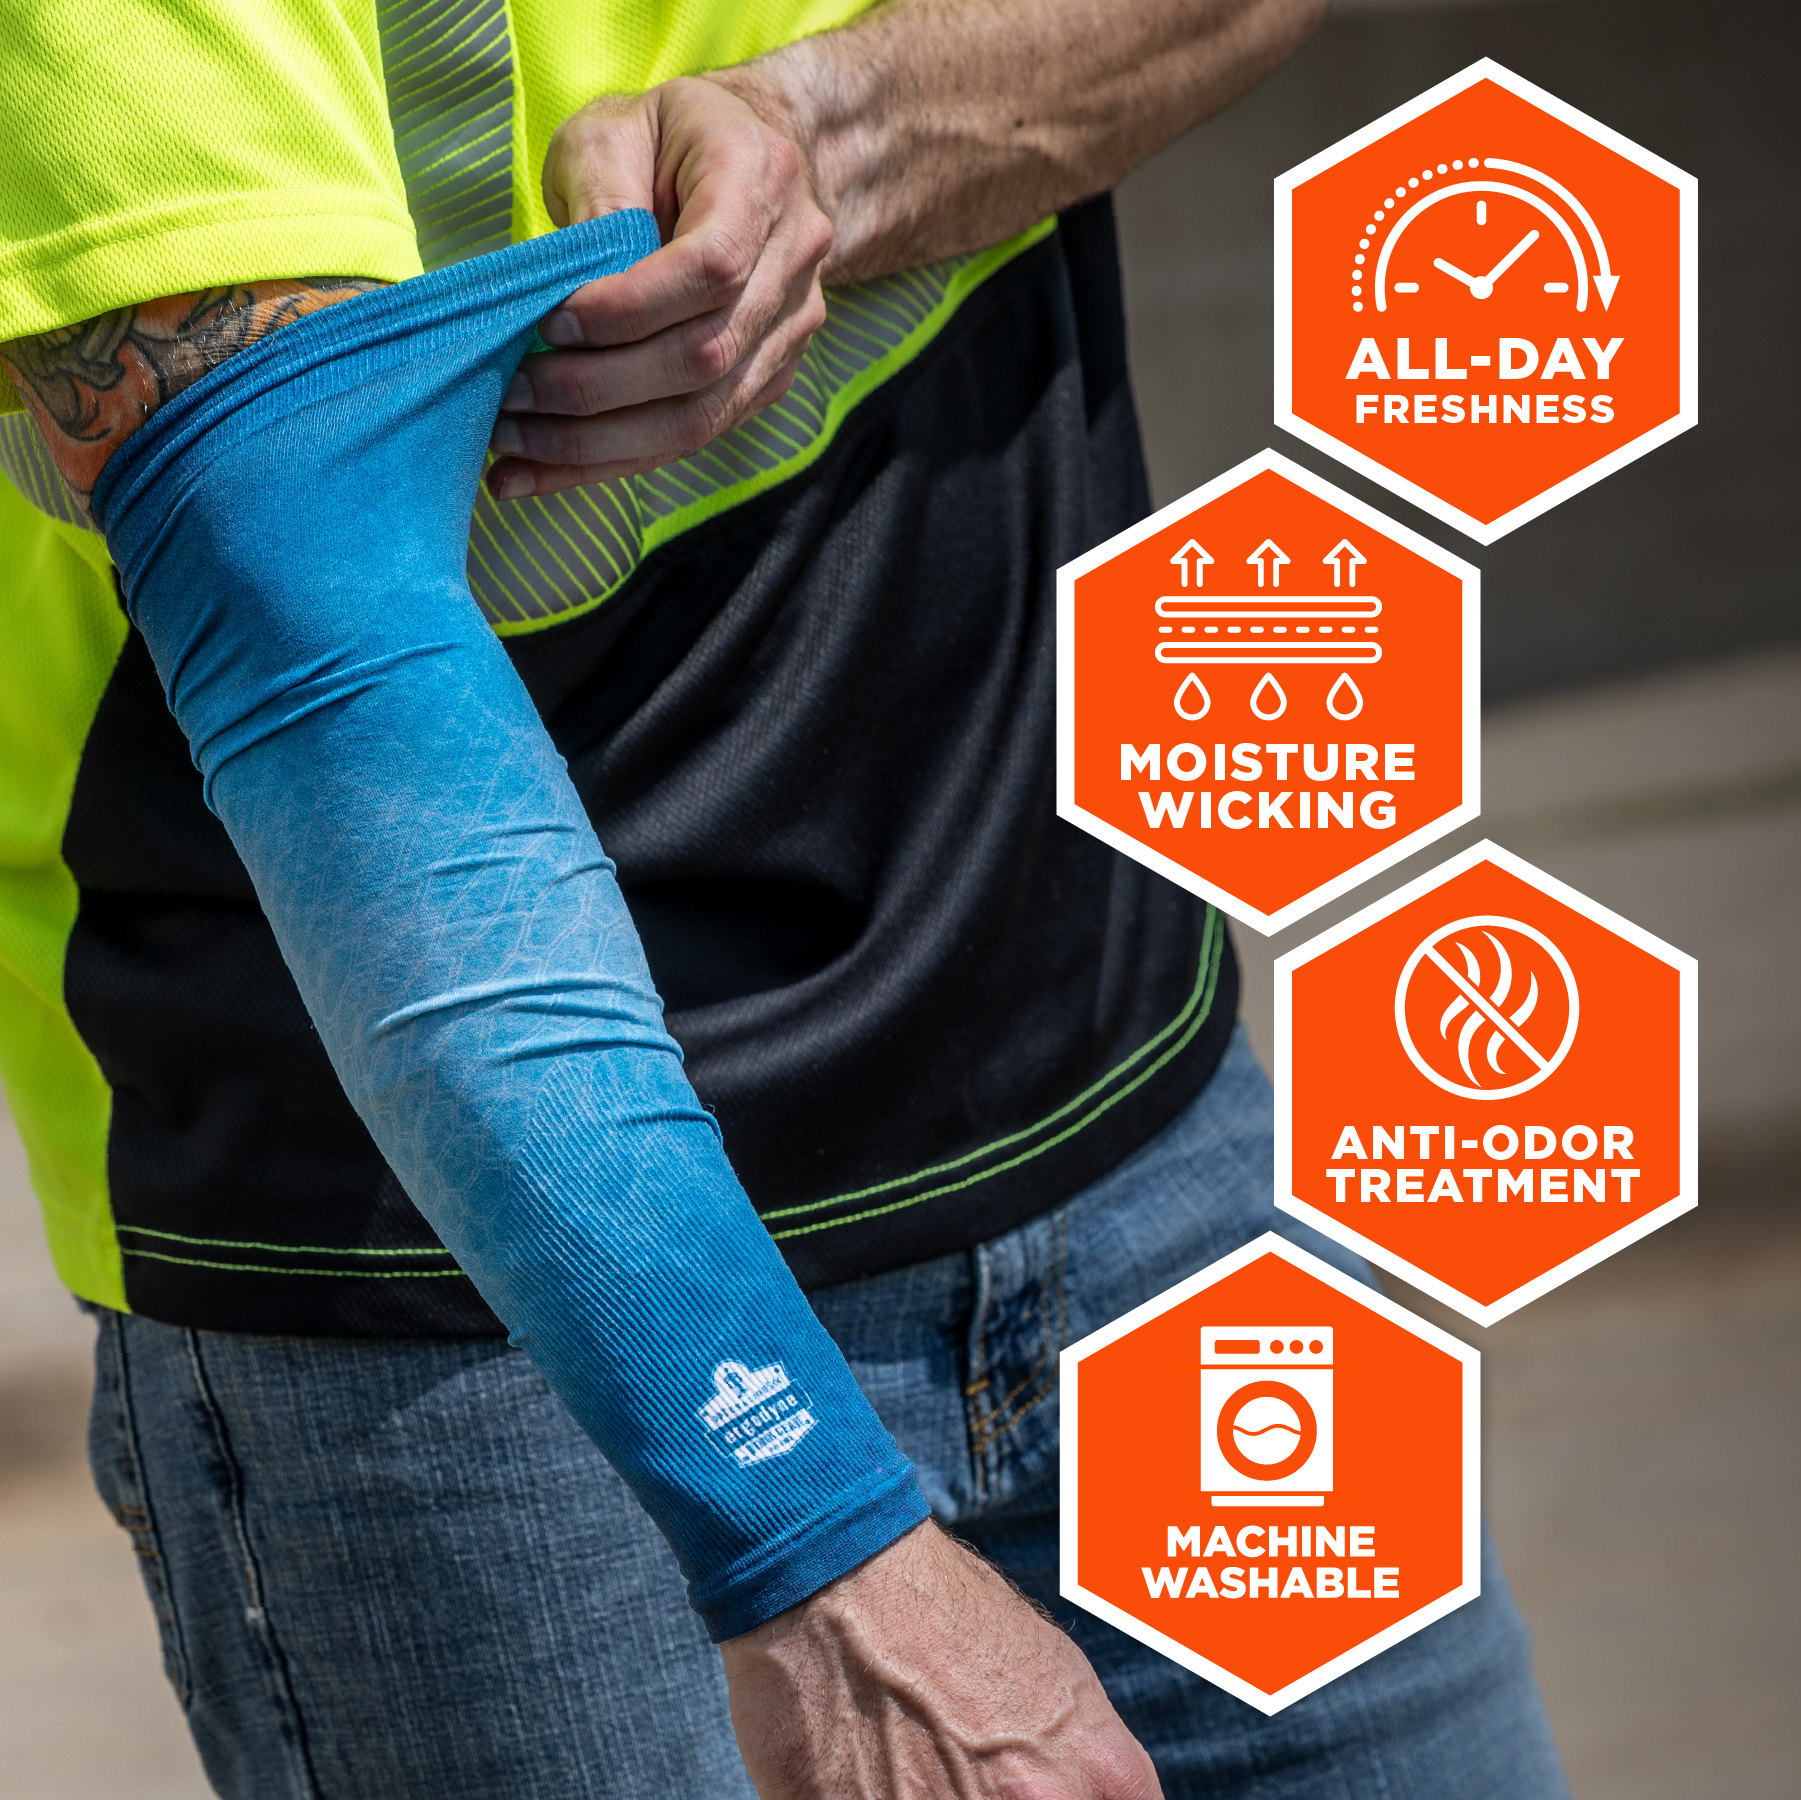 https://www.ergodyne.com/sites/default/files/product-images/12195-6695-sun-protection-arm-sleeves-blue-features.jpg